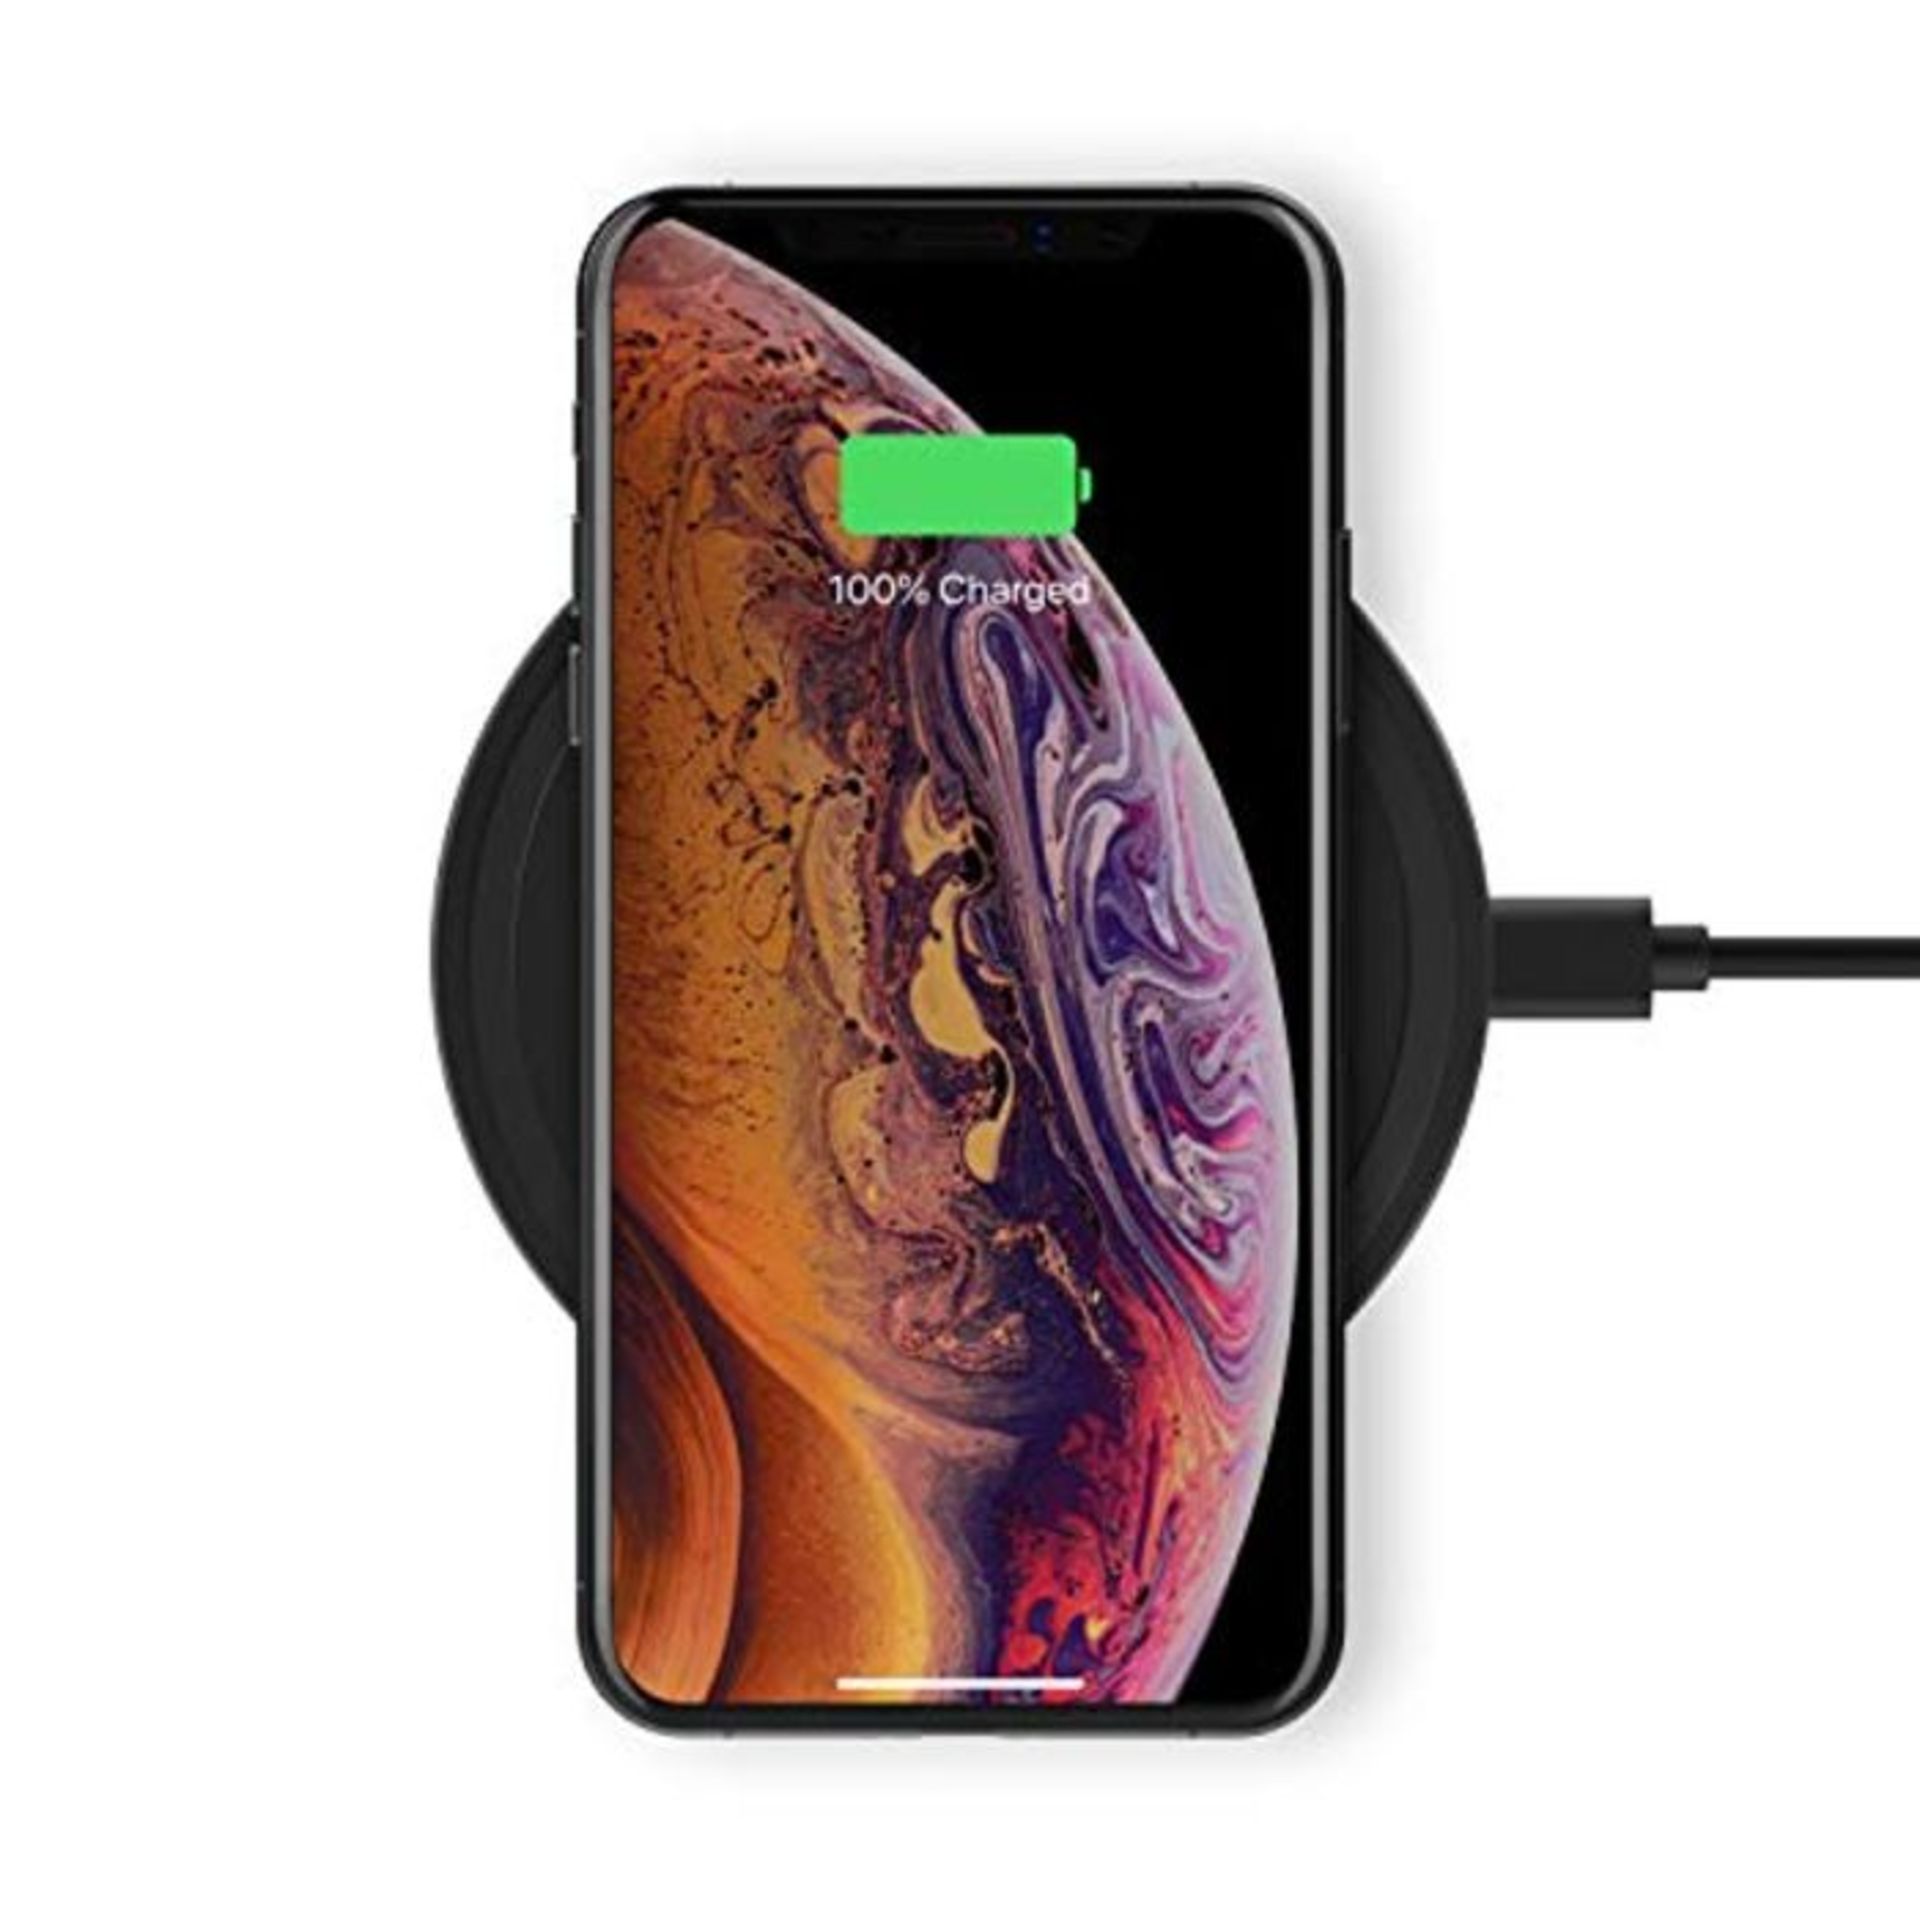 Belkin Boost Up Wireless Charging Pad 10 W, Fast Qi Wireless Charger for iPhone 11, 11